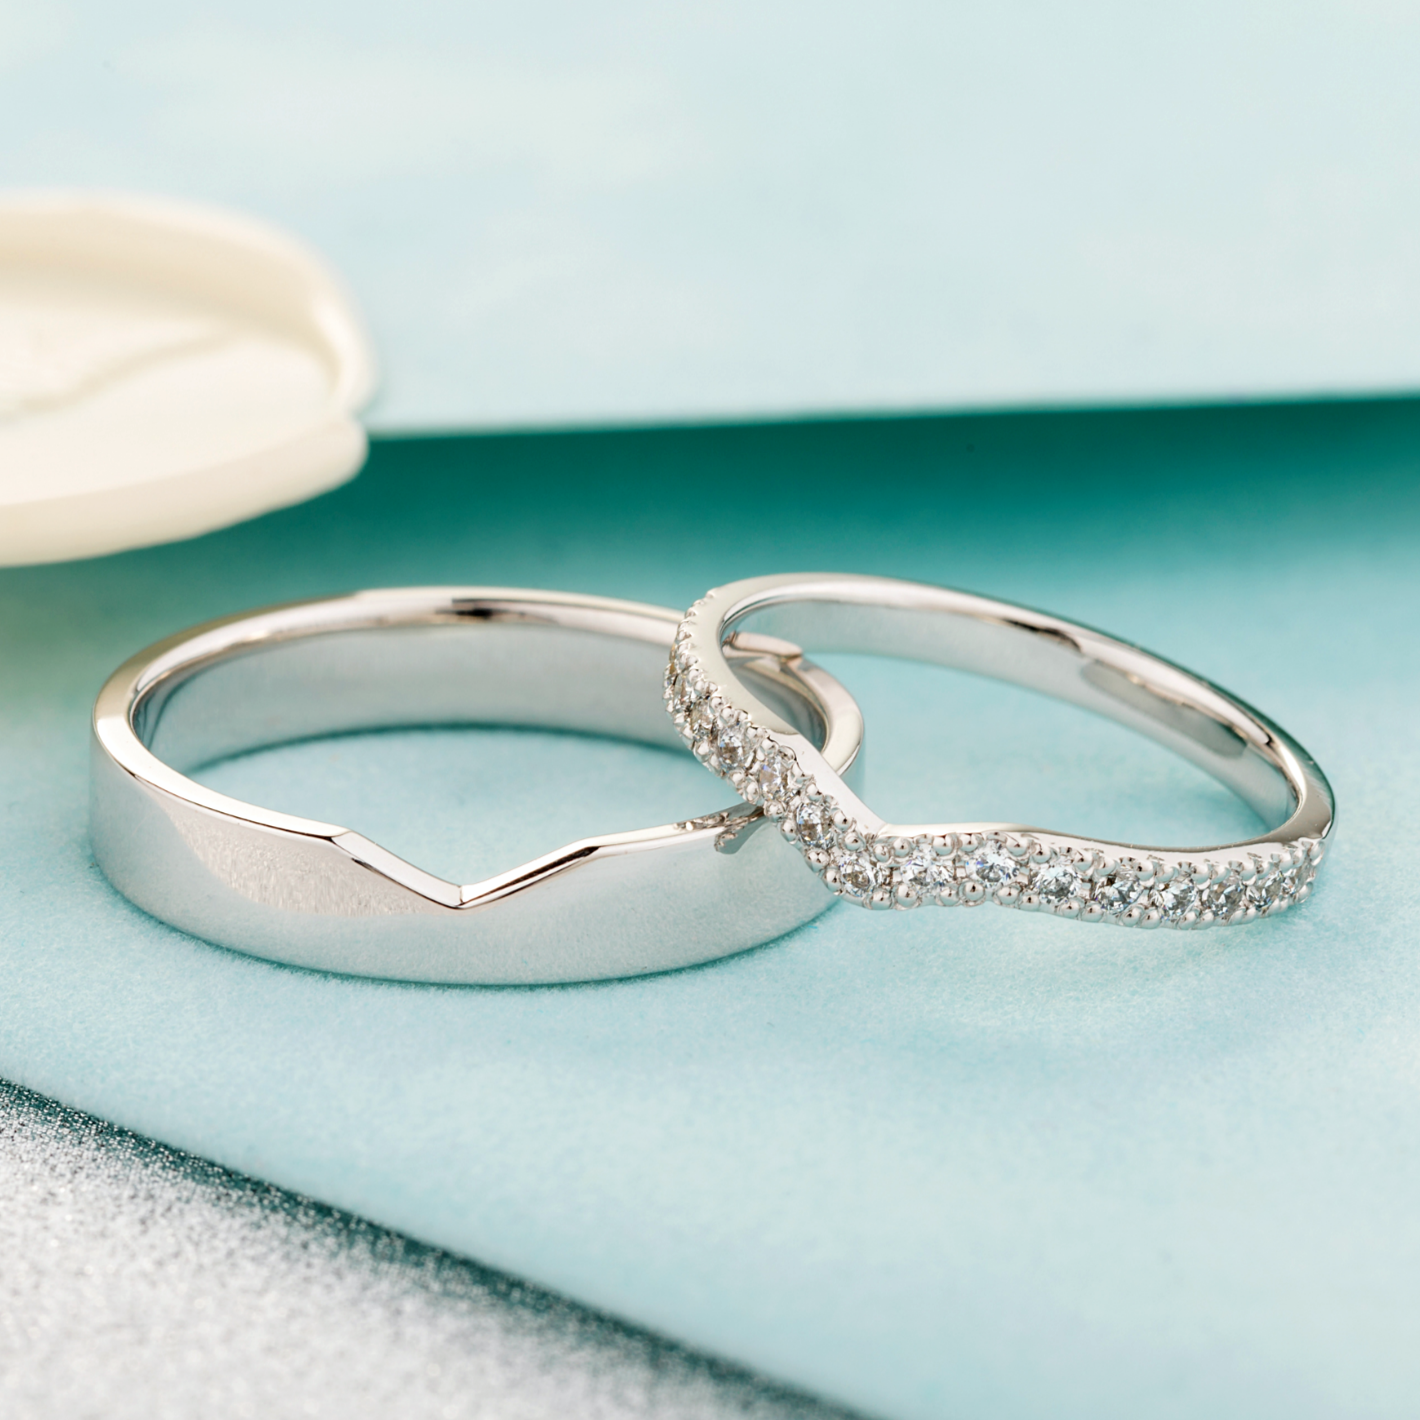 matching wedding bands with diamonds in her ring. Unique wedding bands. His and hers wedding rings set. White gold wedding bands. curved wedding rings. couple wedding rings